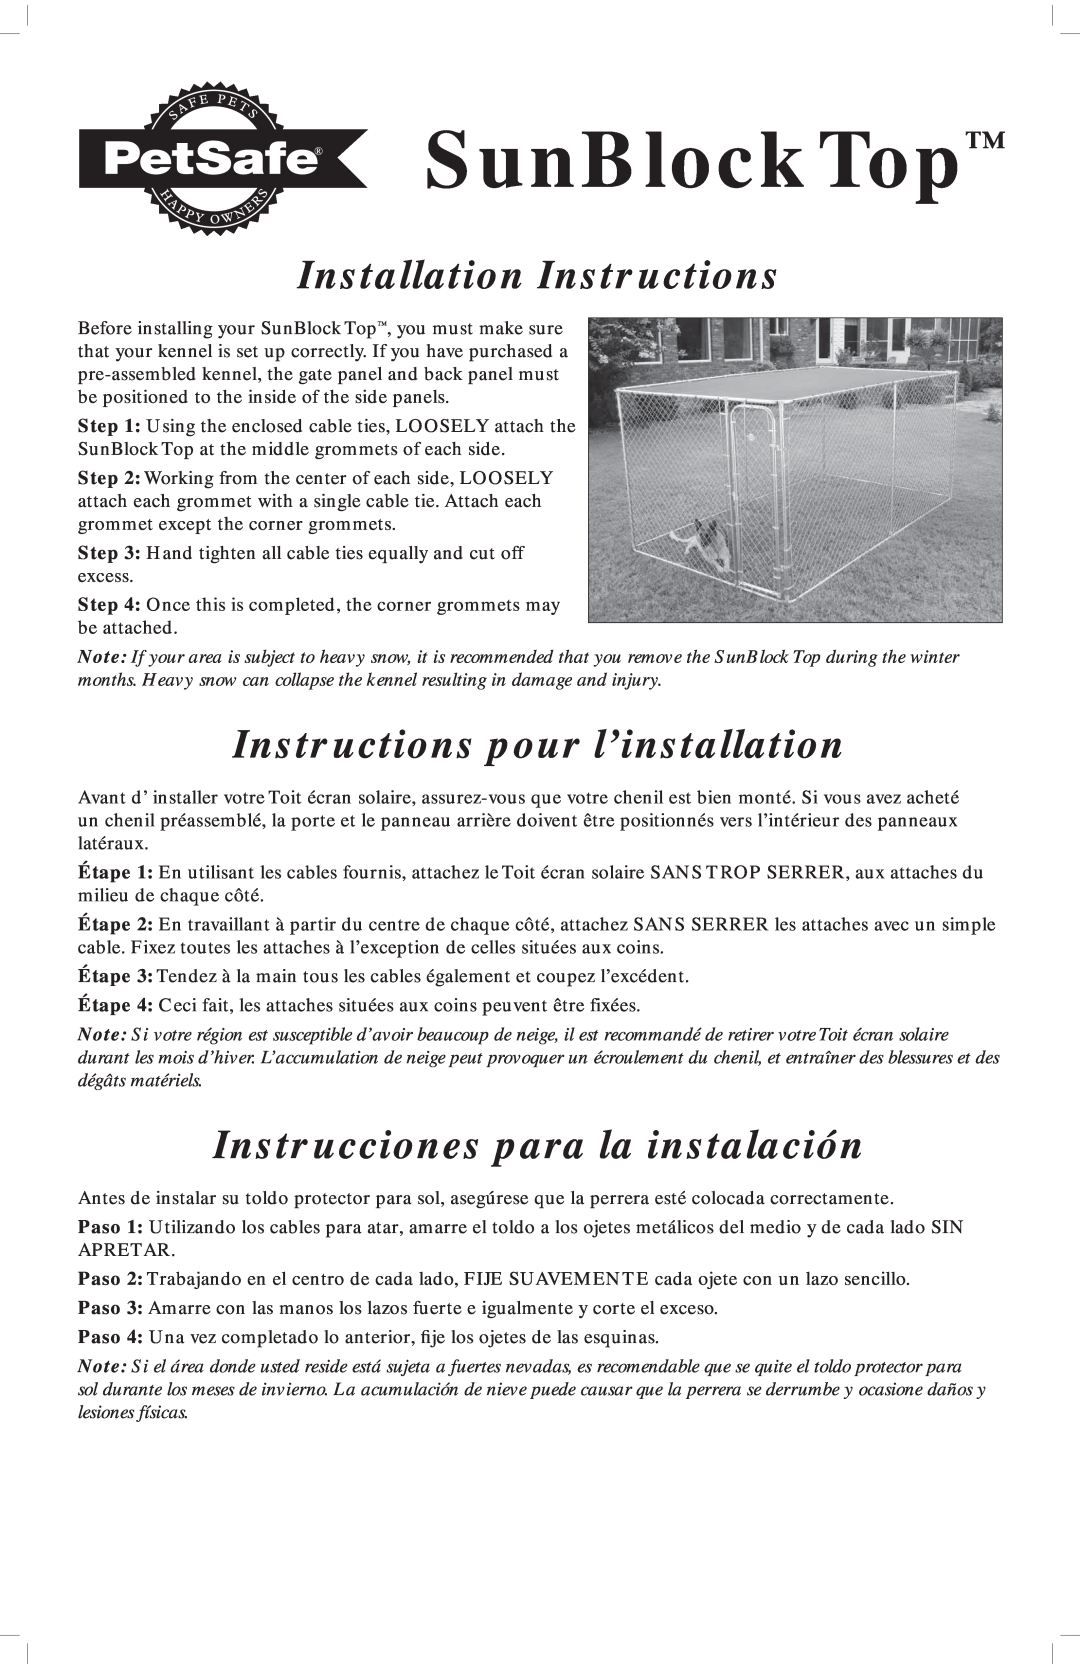 Petsafe Kennel Accessory manual SunBlock Top, Installation Instructions, Instructions pour l’installation 